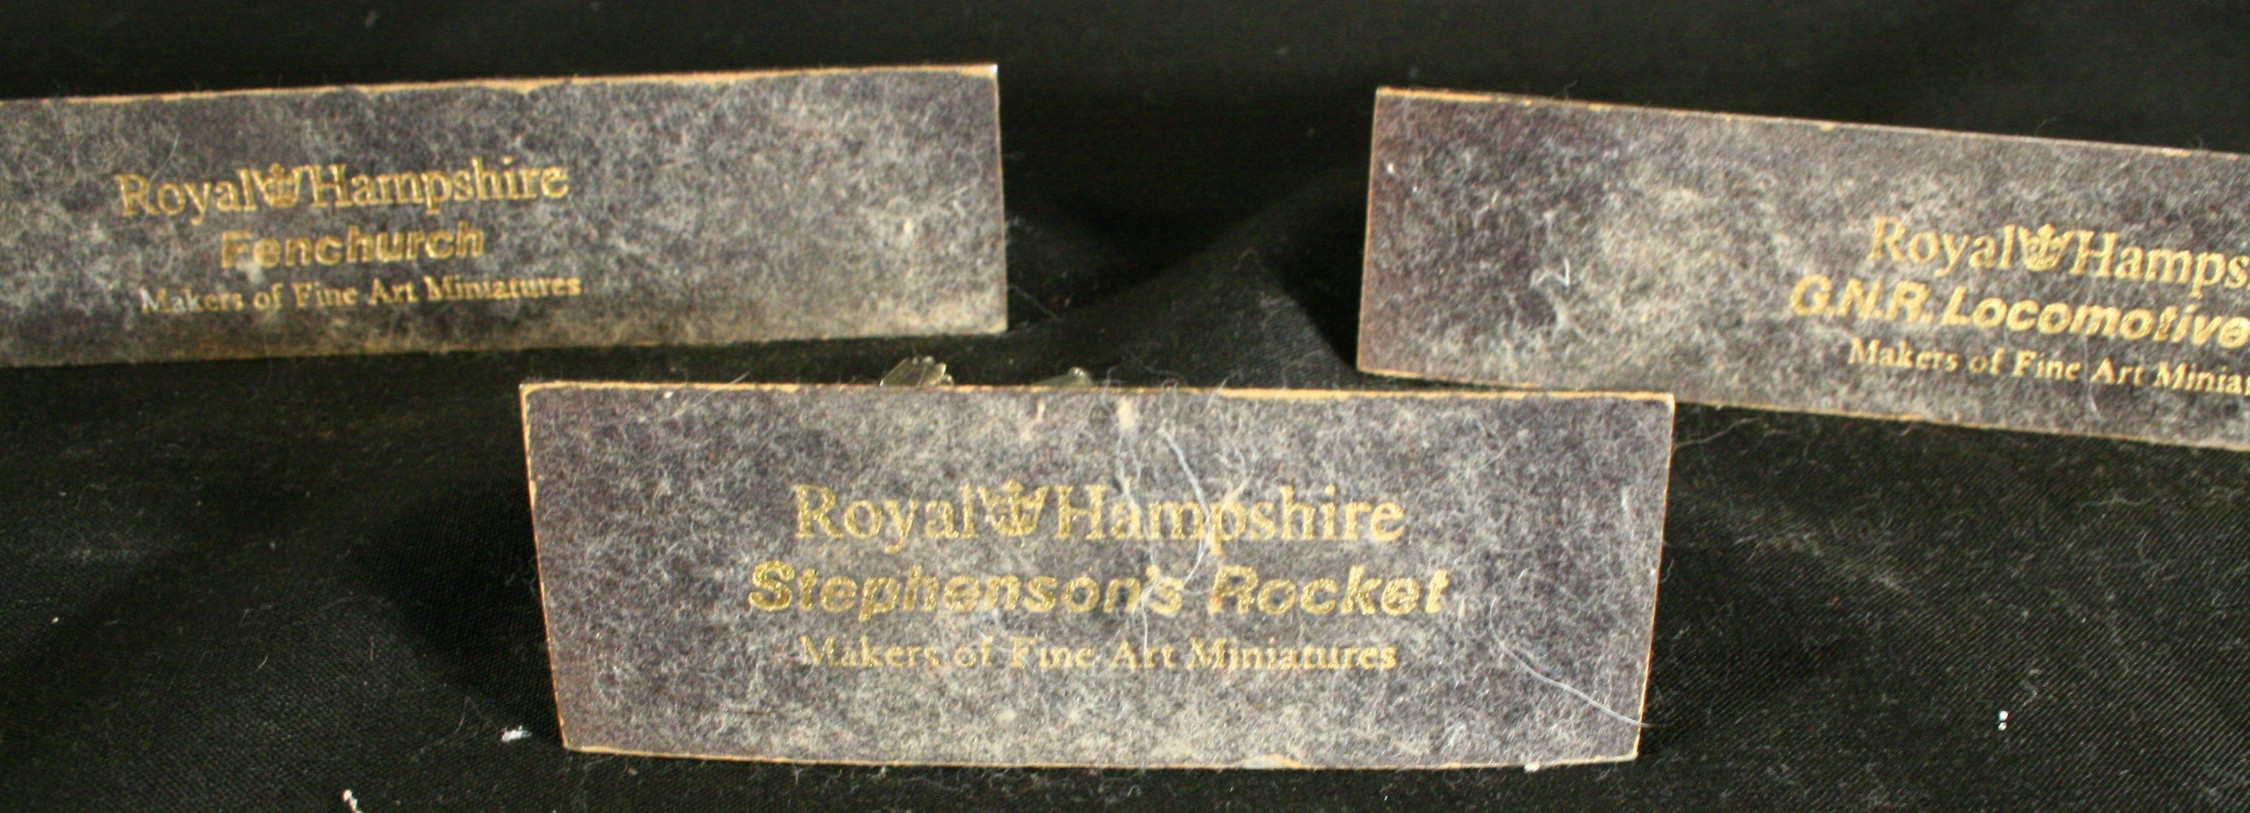 Vintage 3 x Collectable Royal Hampshire Pewter Train Models - Image 2 of 4